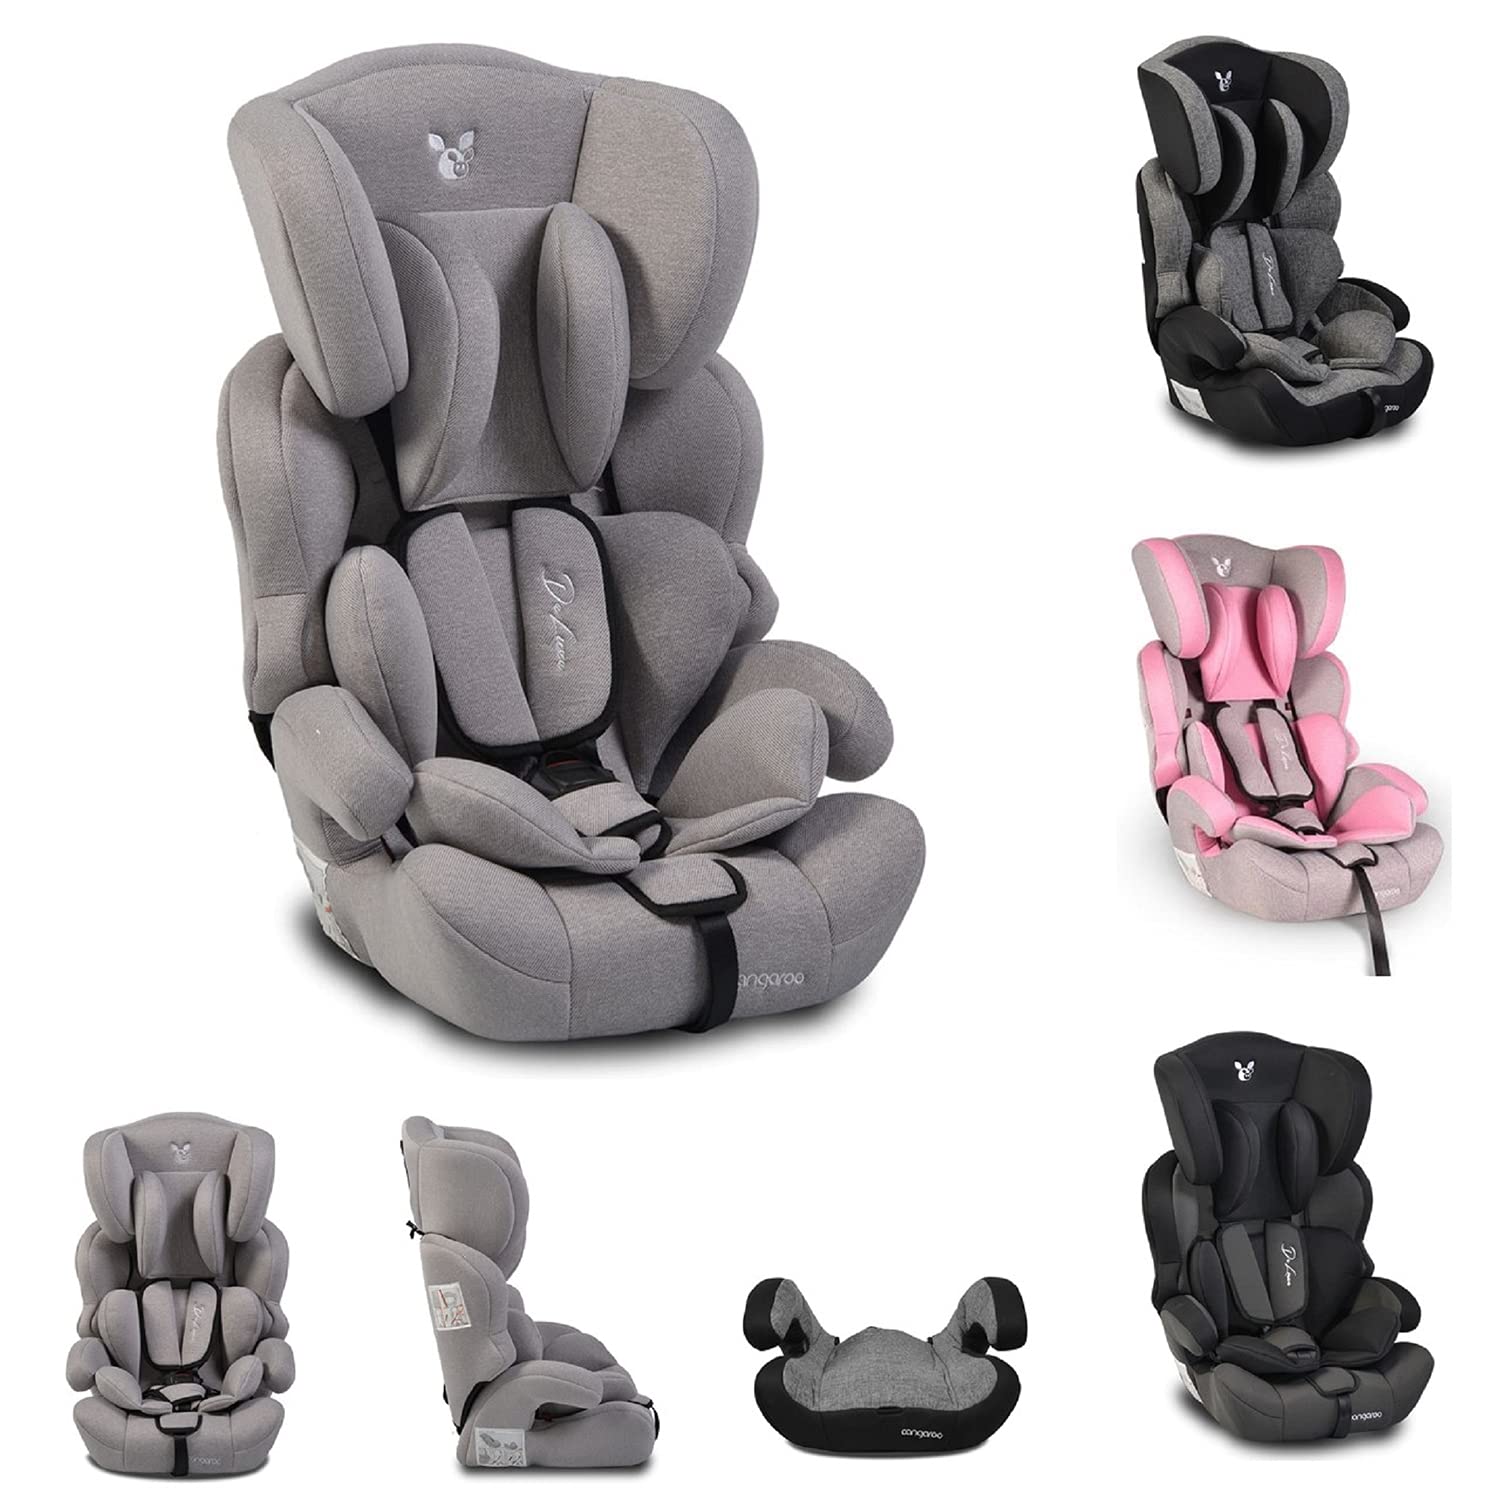 Cangaroo Deluxe Child Seat Group 1/2/3 (9-36 kg) 1 to 12 Years Adjustable Colour: Light Grey